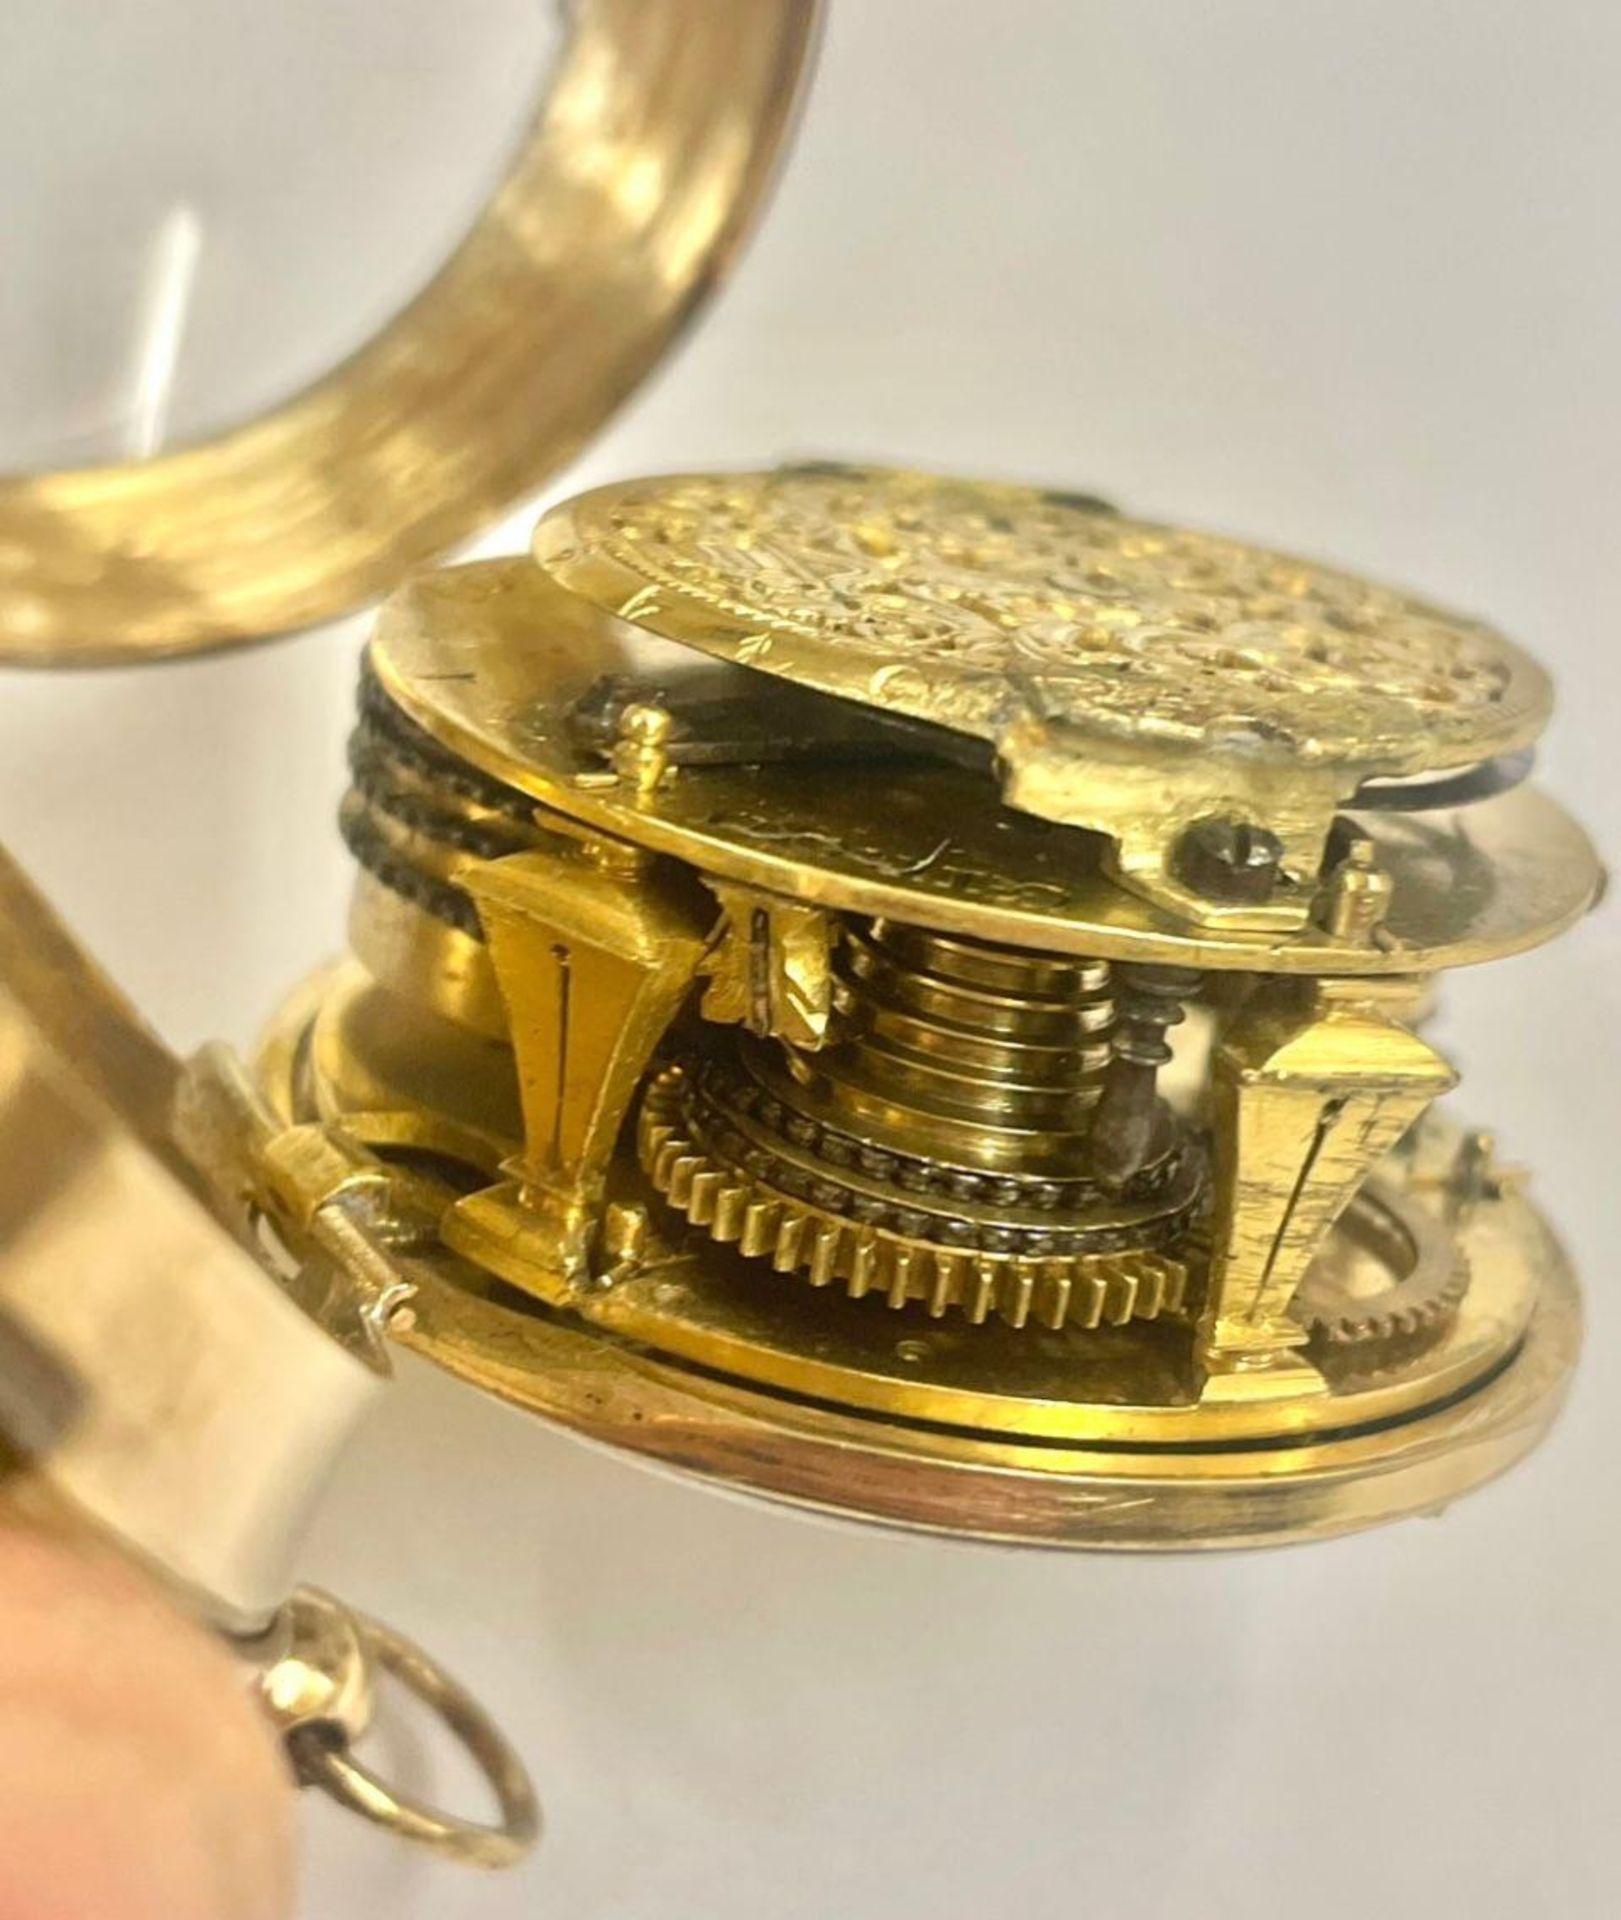 Rare 1600s Oignon single hand Pocket Watch, Girod Copet. French Gilt c1680, Ticks if touch the fly - Image 11 of 18